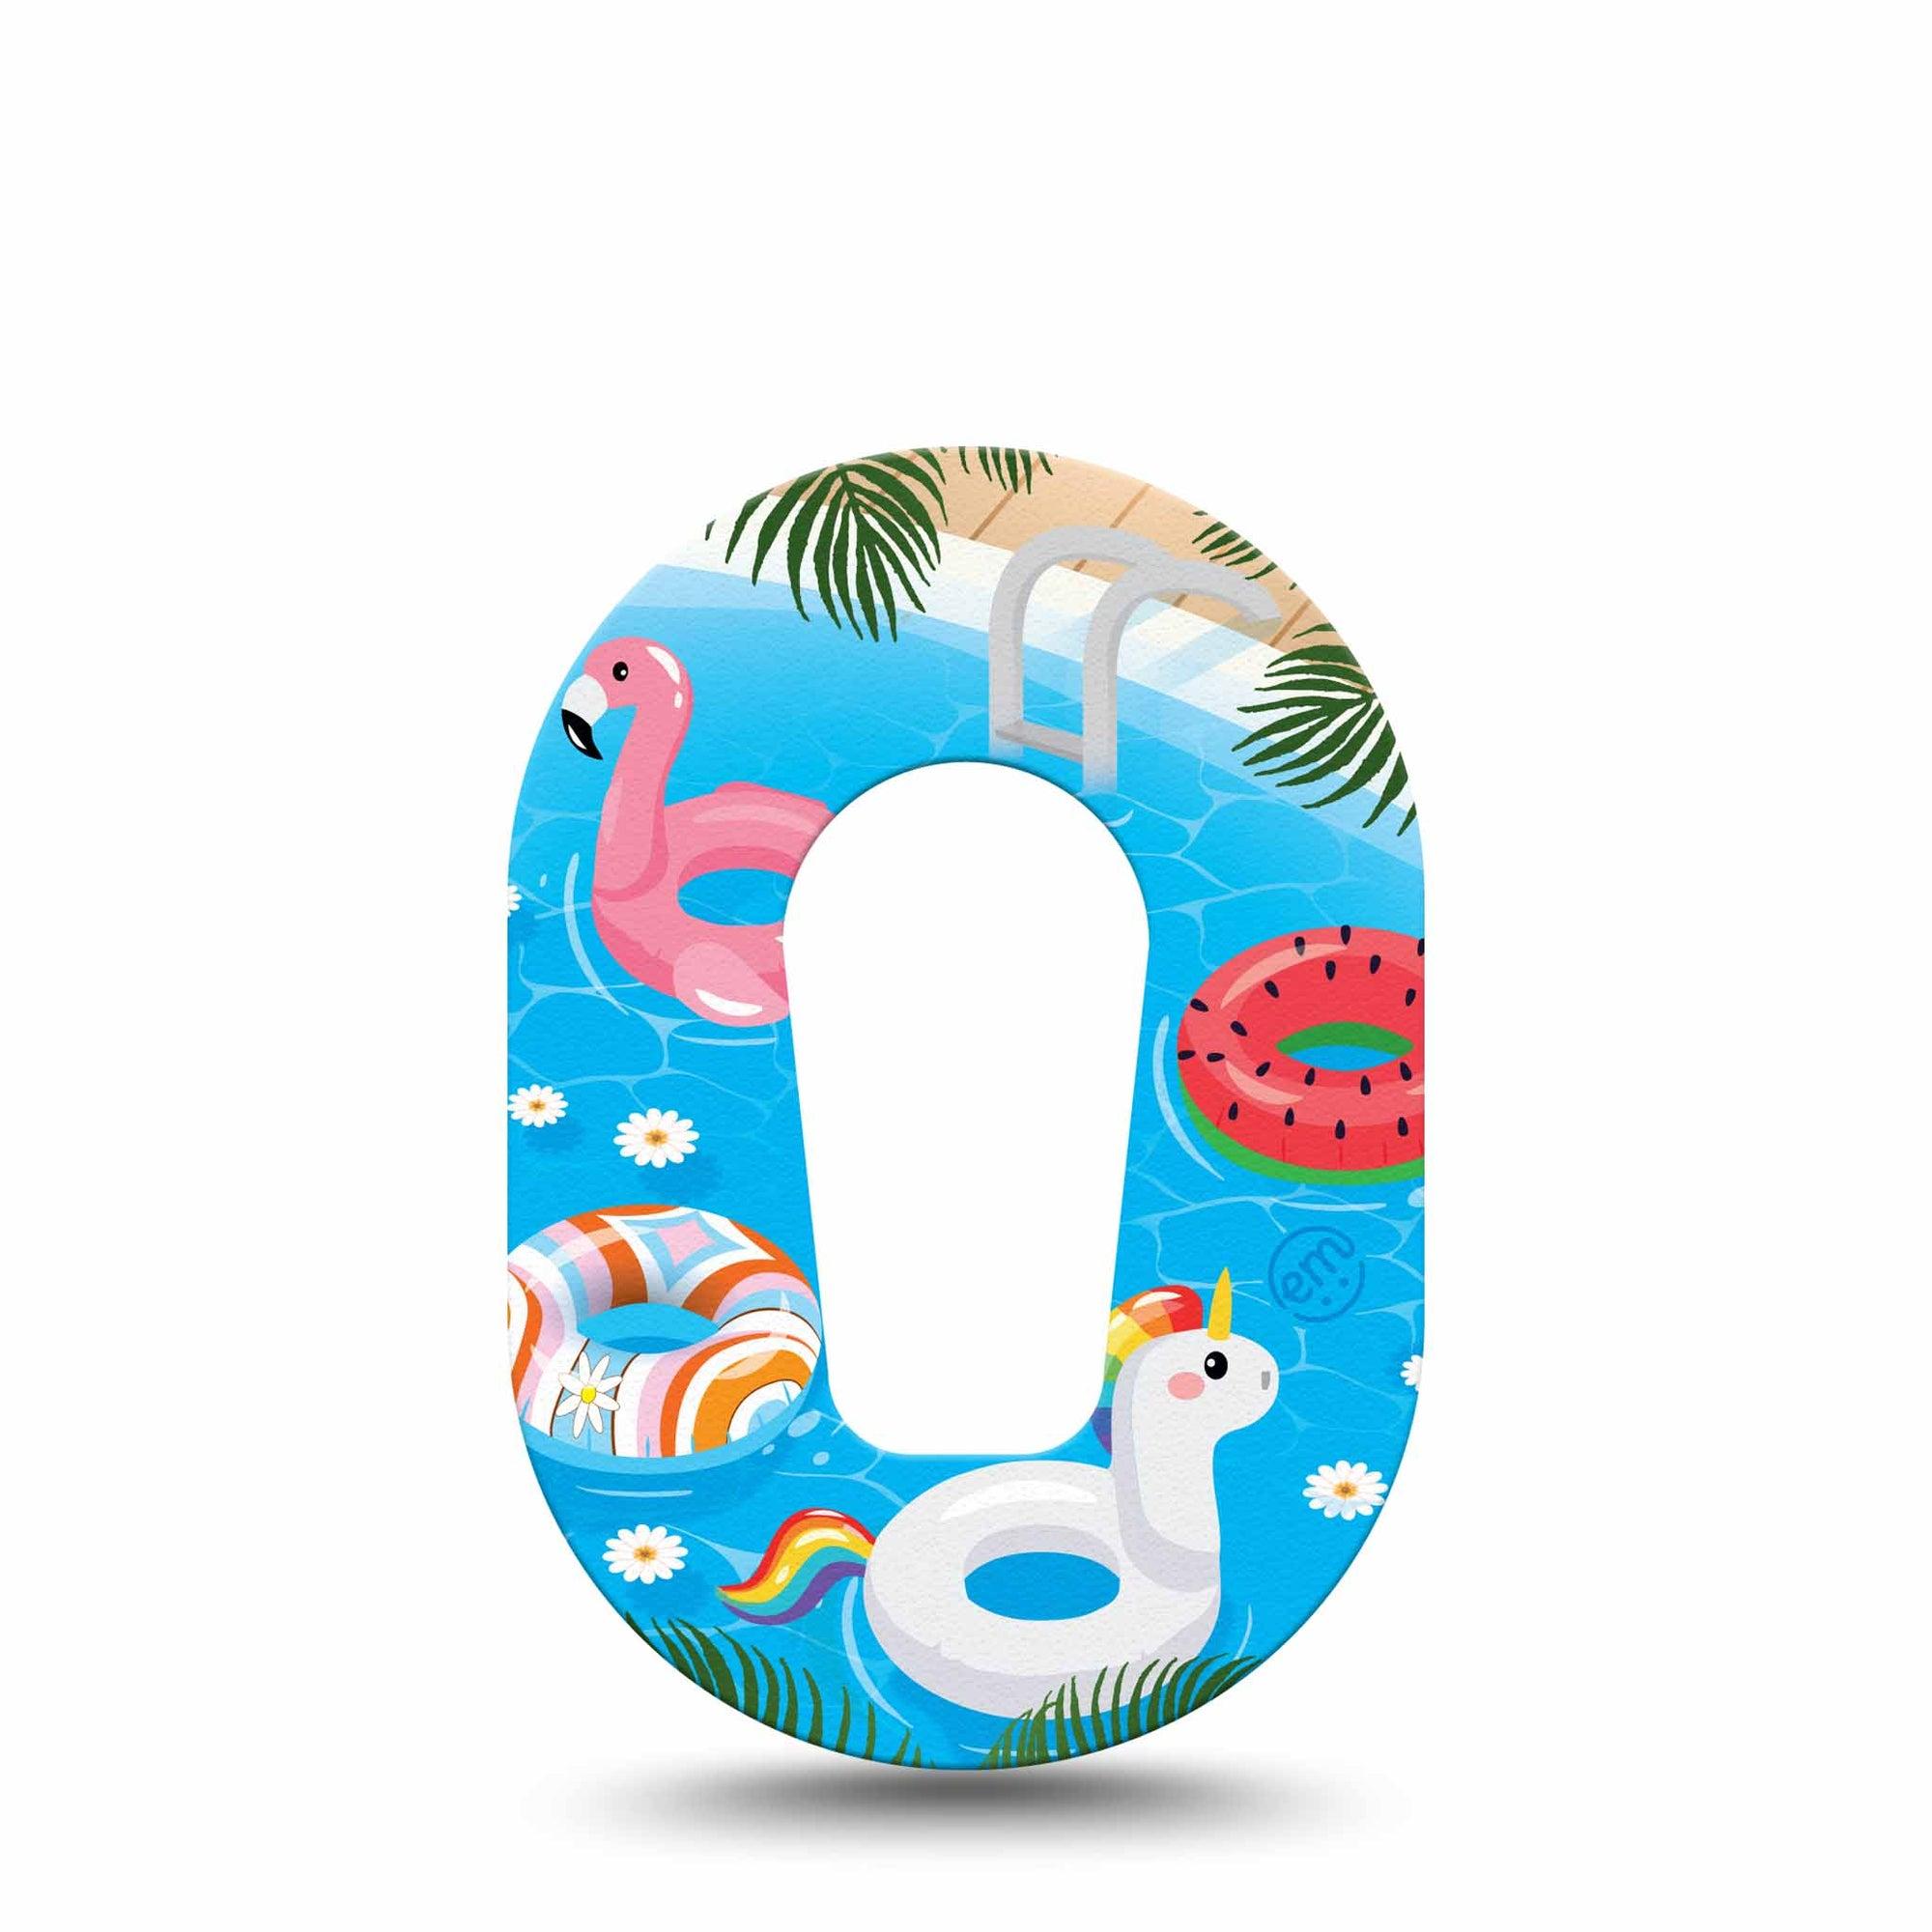 ExpressionMed Summer Pool Dexcom G6 Mini Tape, Single, Pool Resort Inspired, CGM Overlay Patch Design